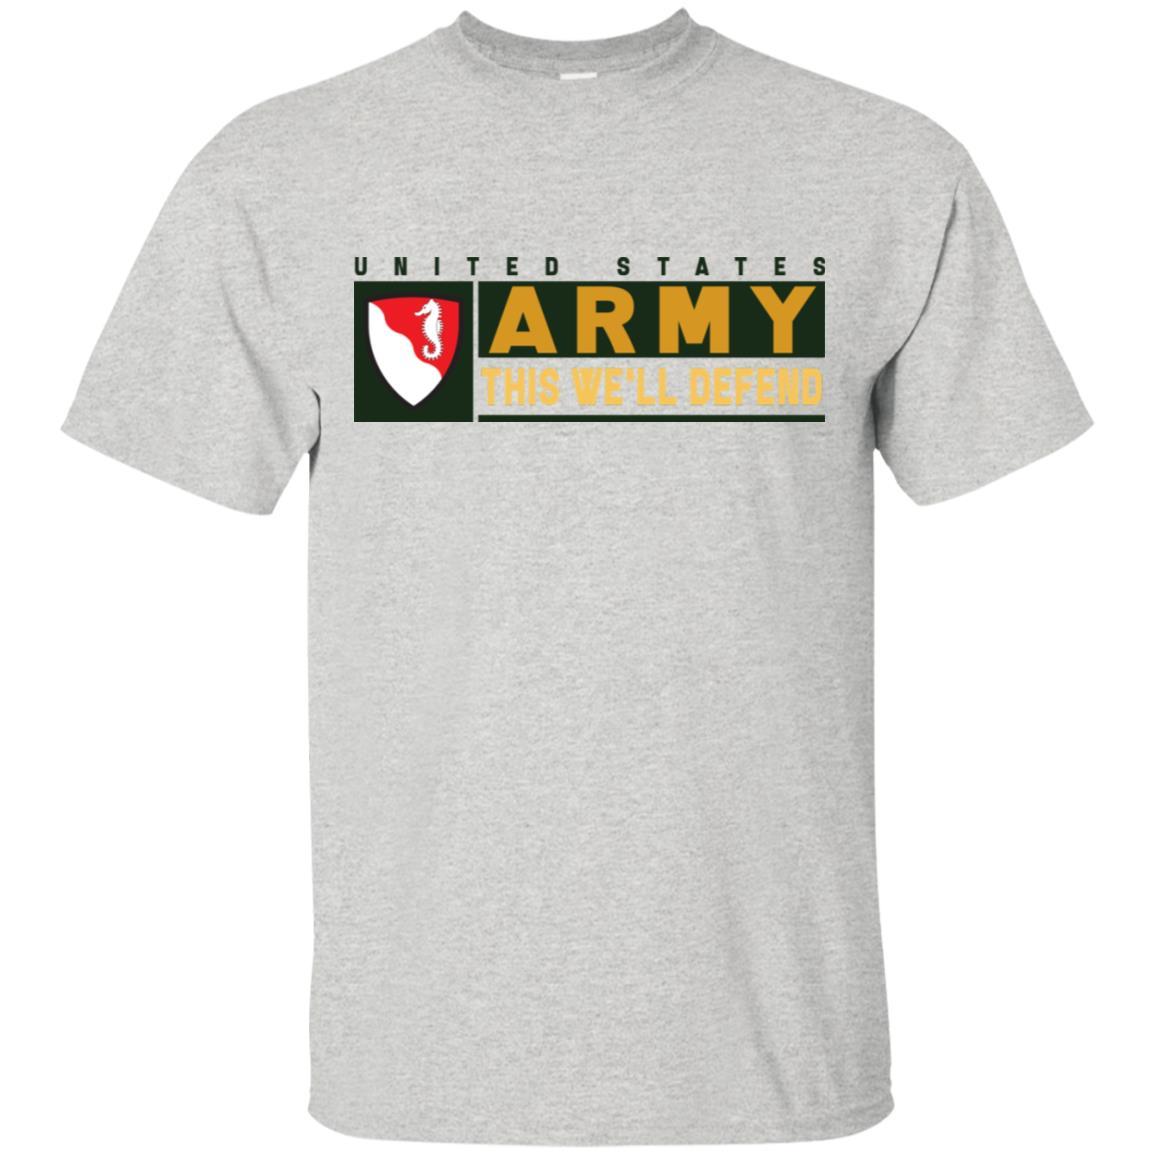 US Army 36TH ENGINEER BRIGADE- This We'll Defend T-Shirt On Front For Men-TShirt-Army-Veterans Nation